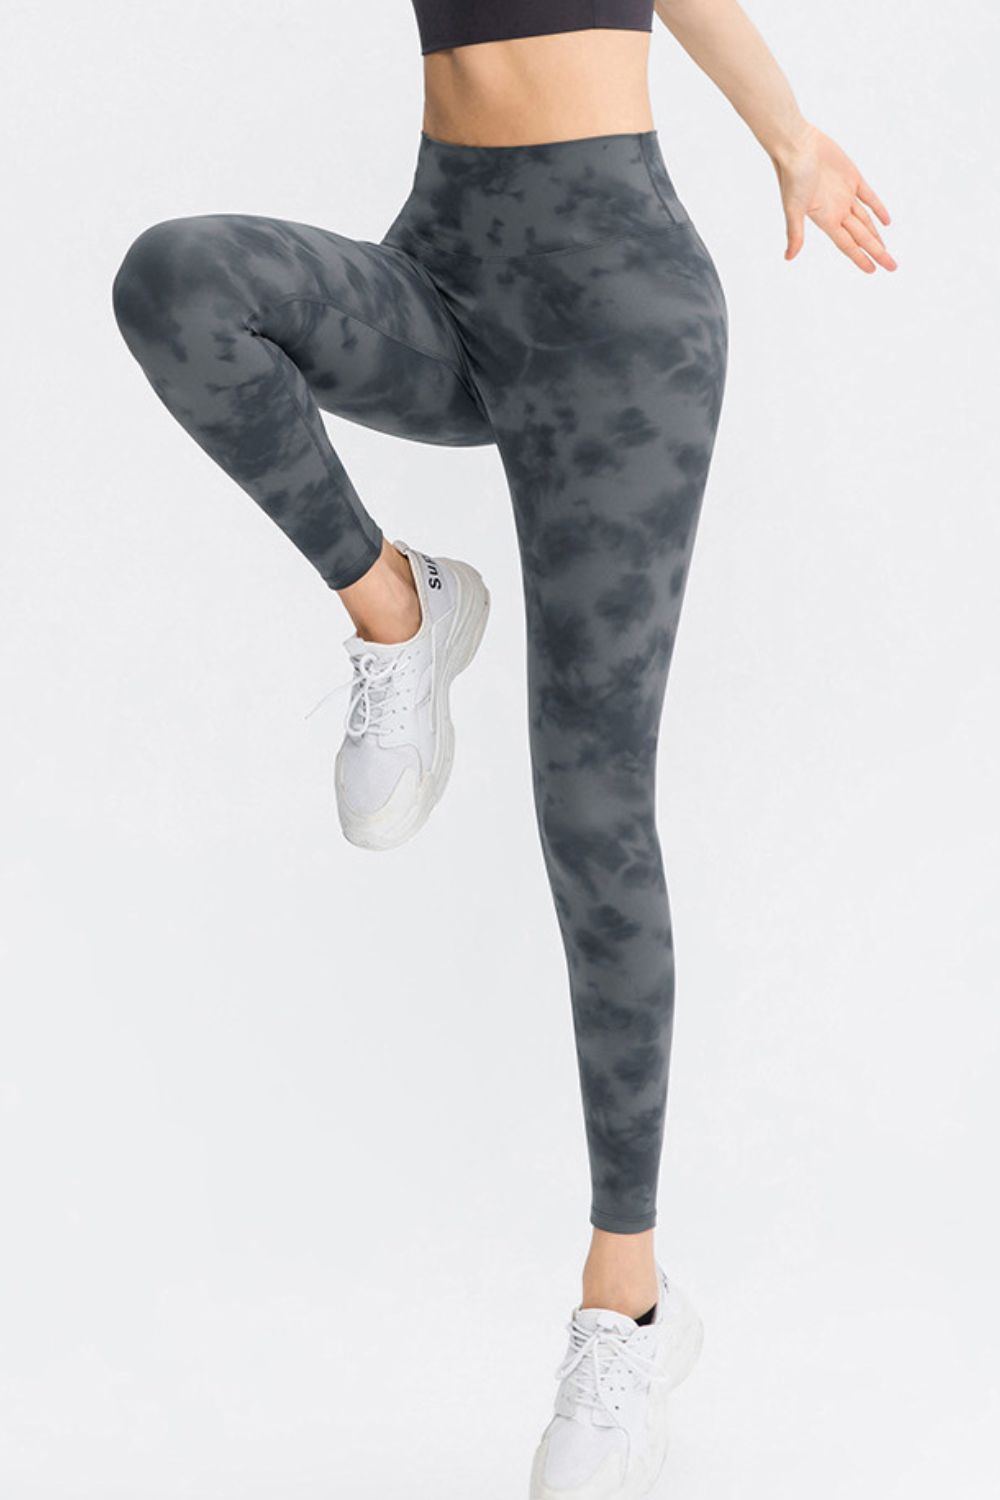 Wide Waistband Slim Fit Long Sports Pants Print on any thing USA/STOD clothes